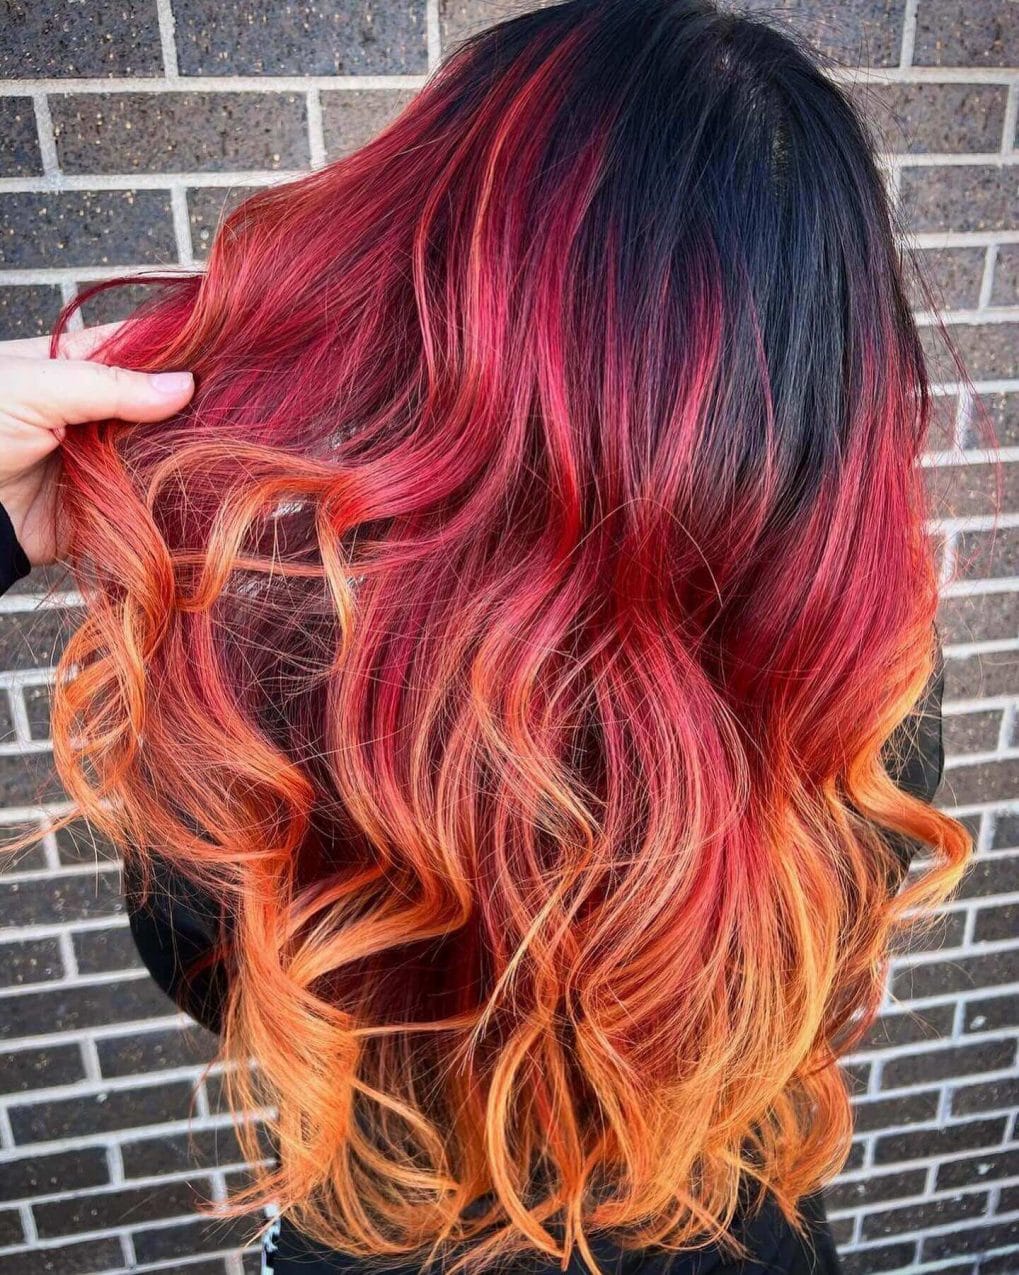 Warm red and orange wavy hair evoking a late-summer bonfire